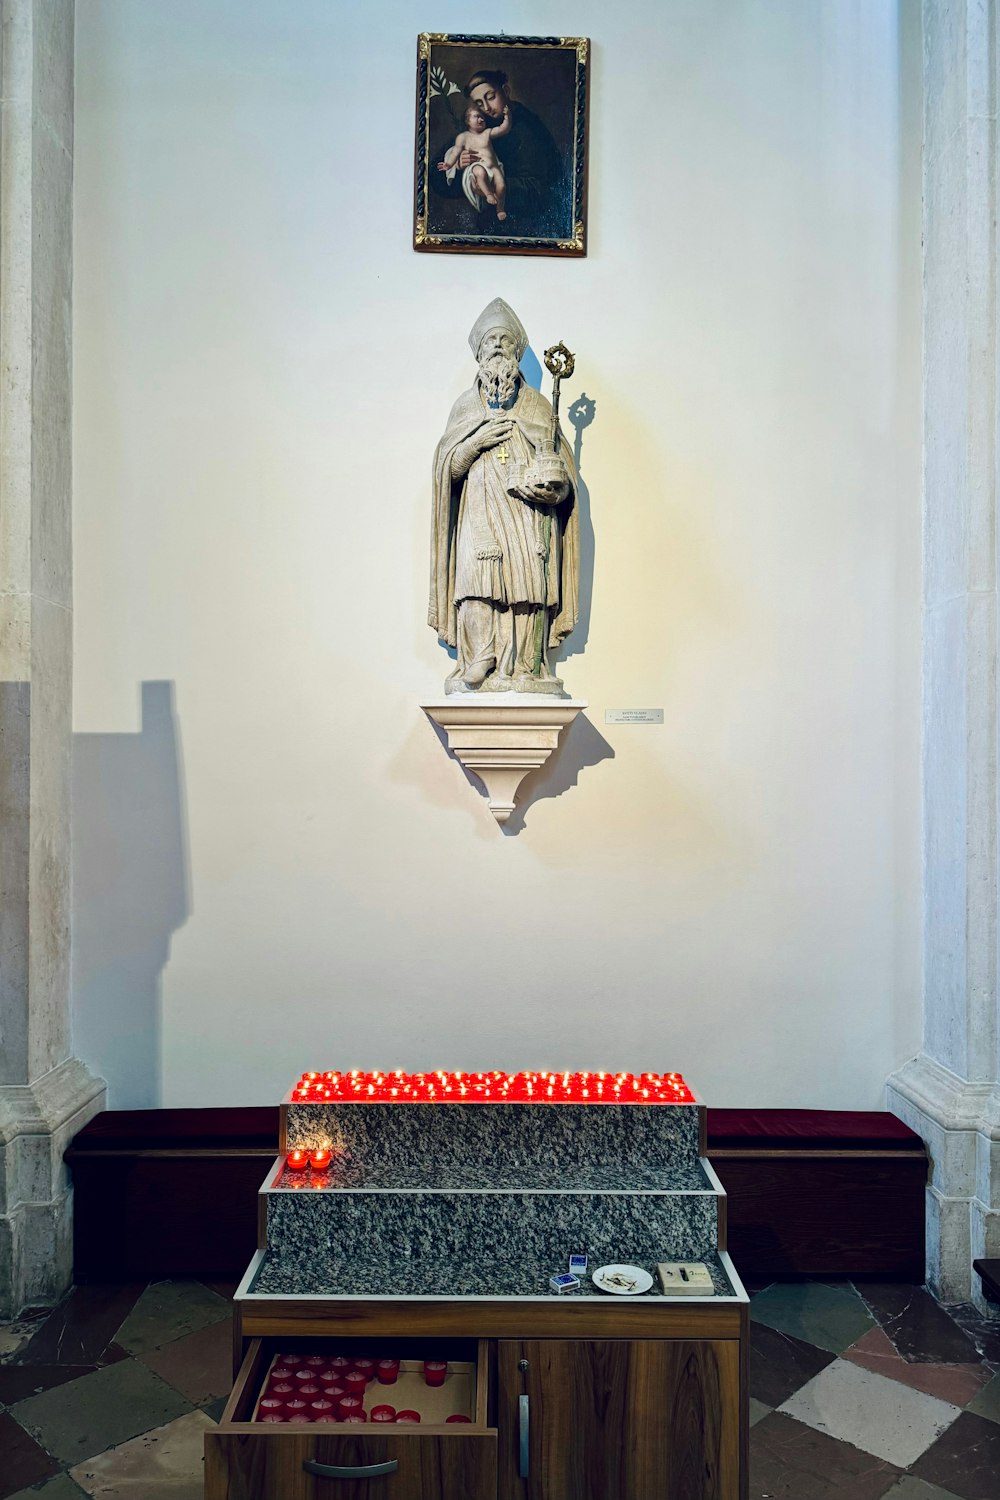 a statue of a person with a candle in front of it